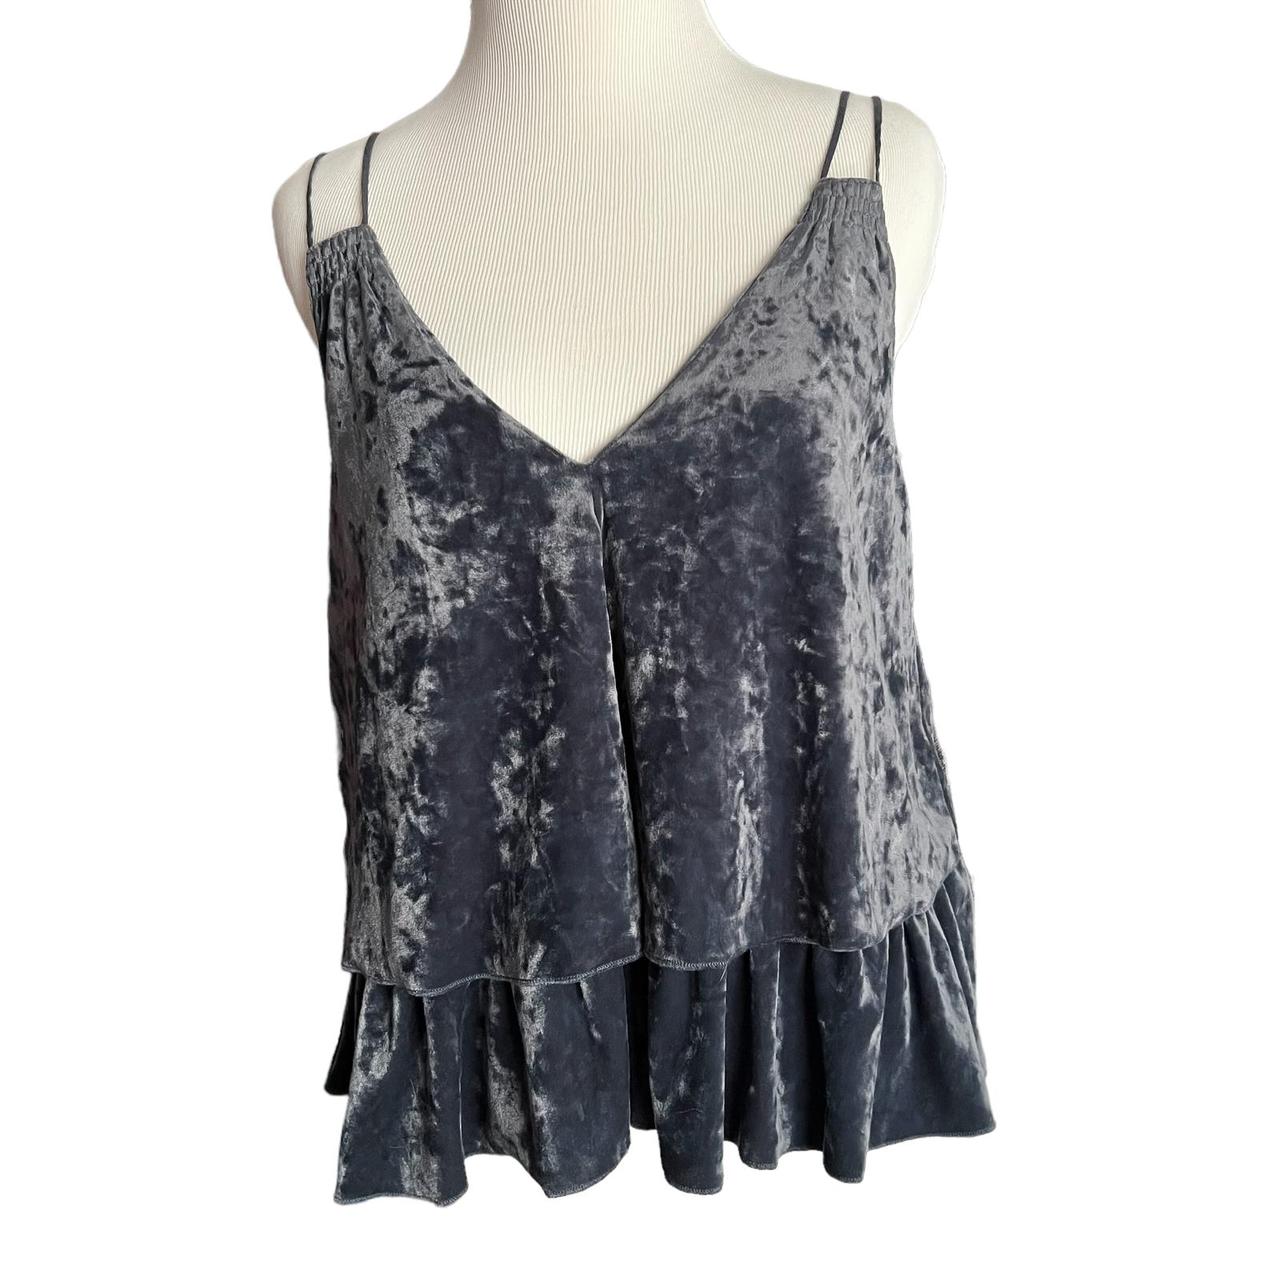 Black Velour Tank Top by Aerie